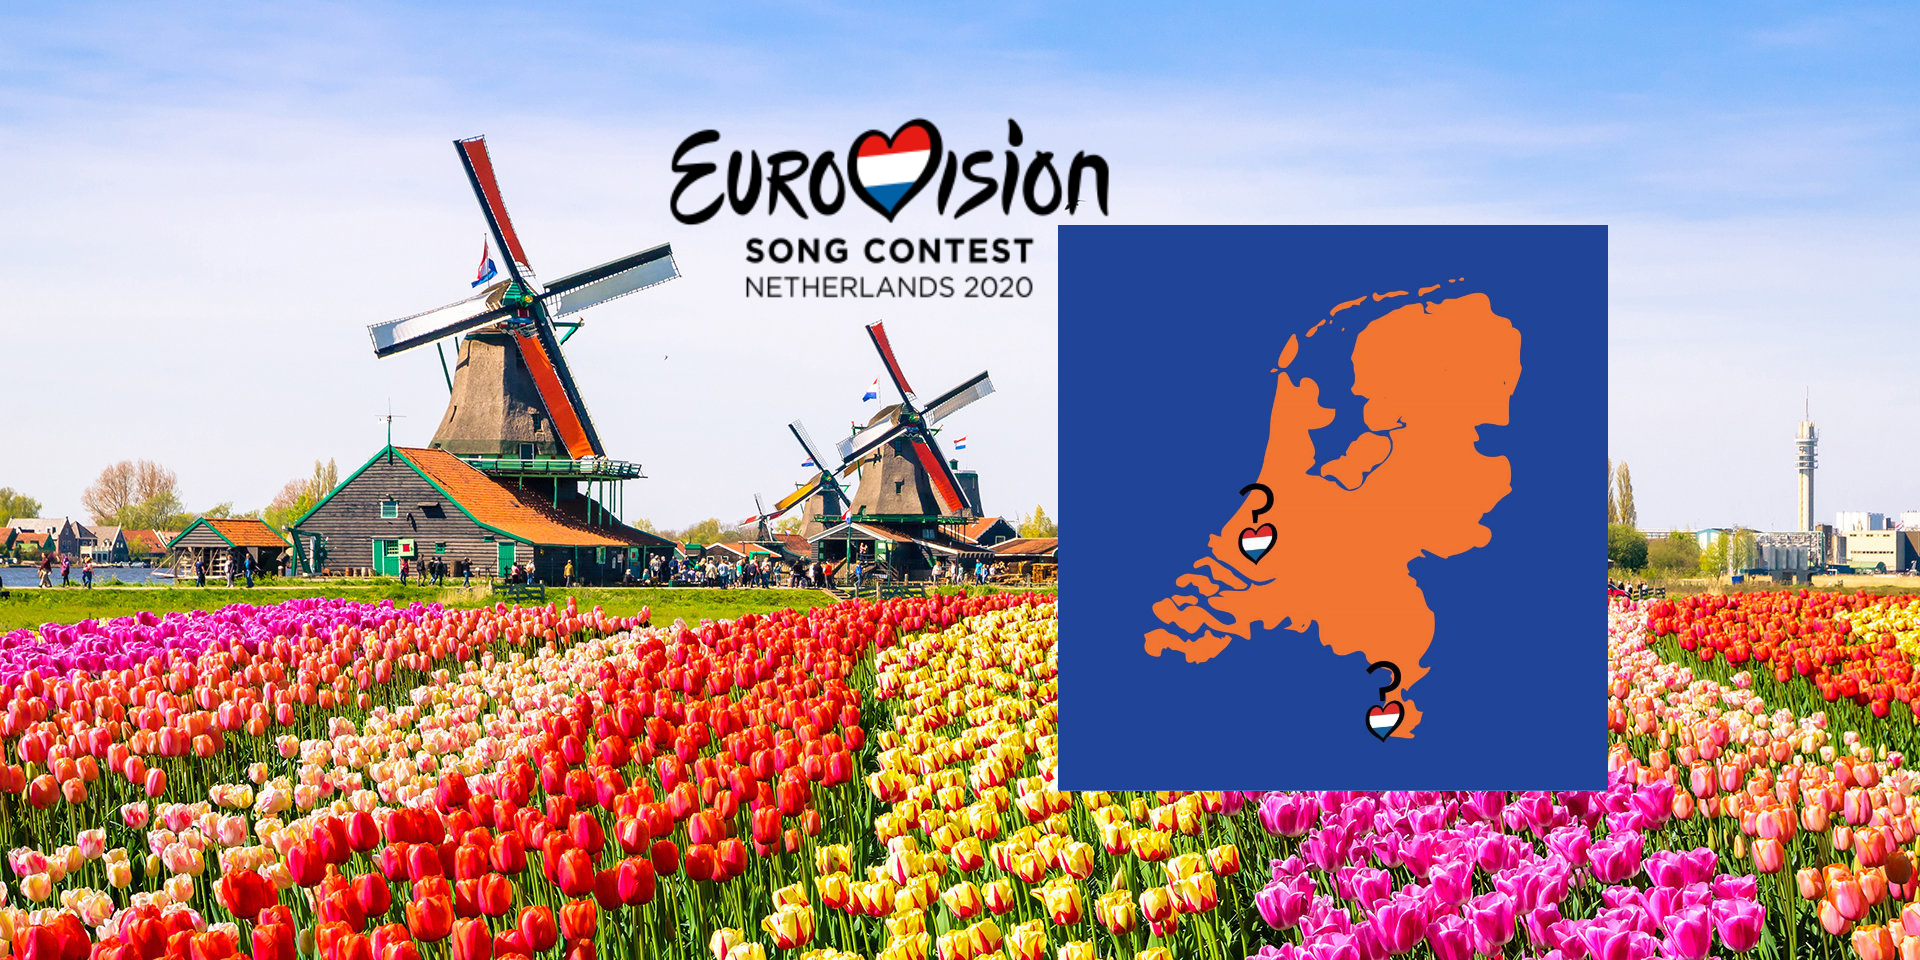 Eurovision 2020: The host city race comes down to two: Maastricht and Rotterdam